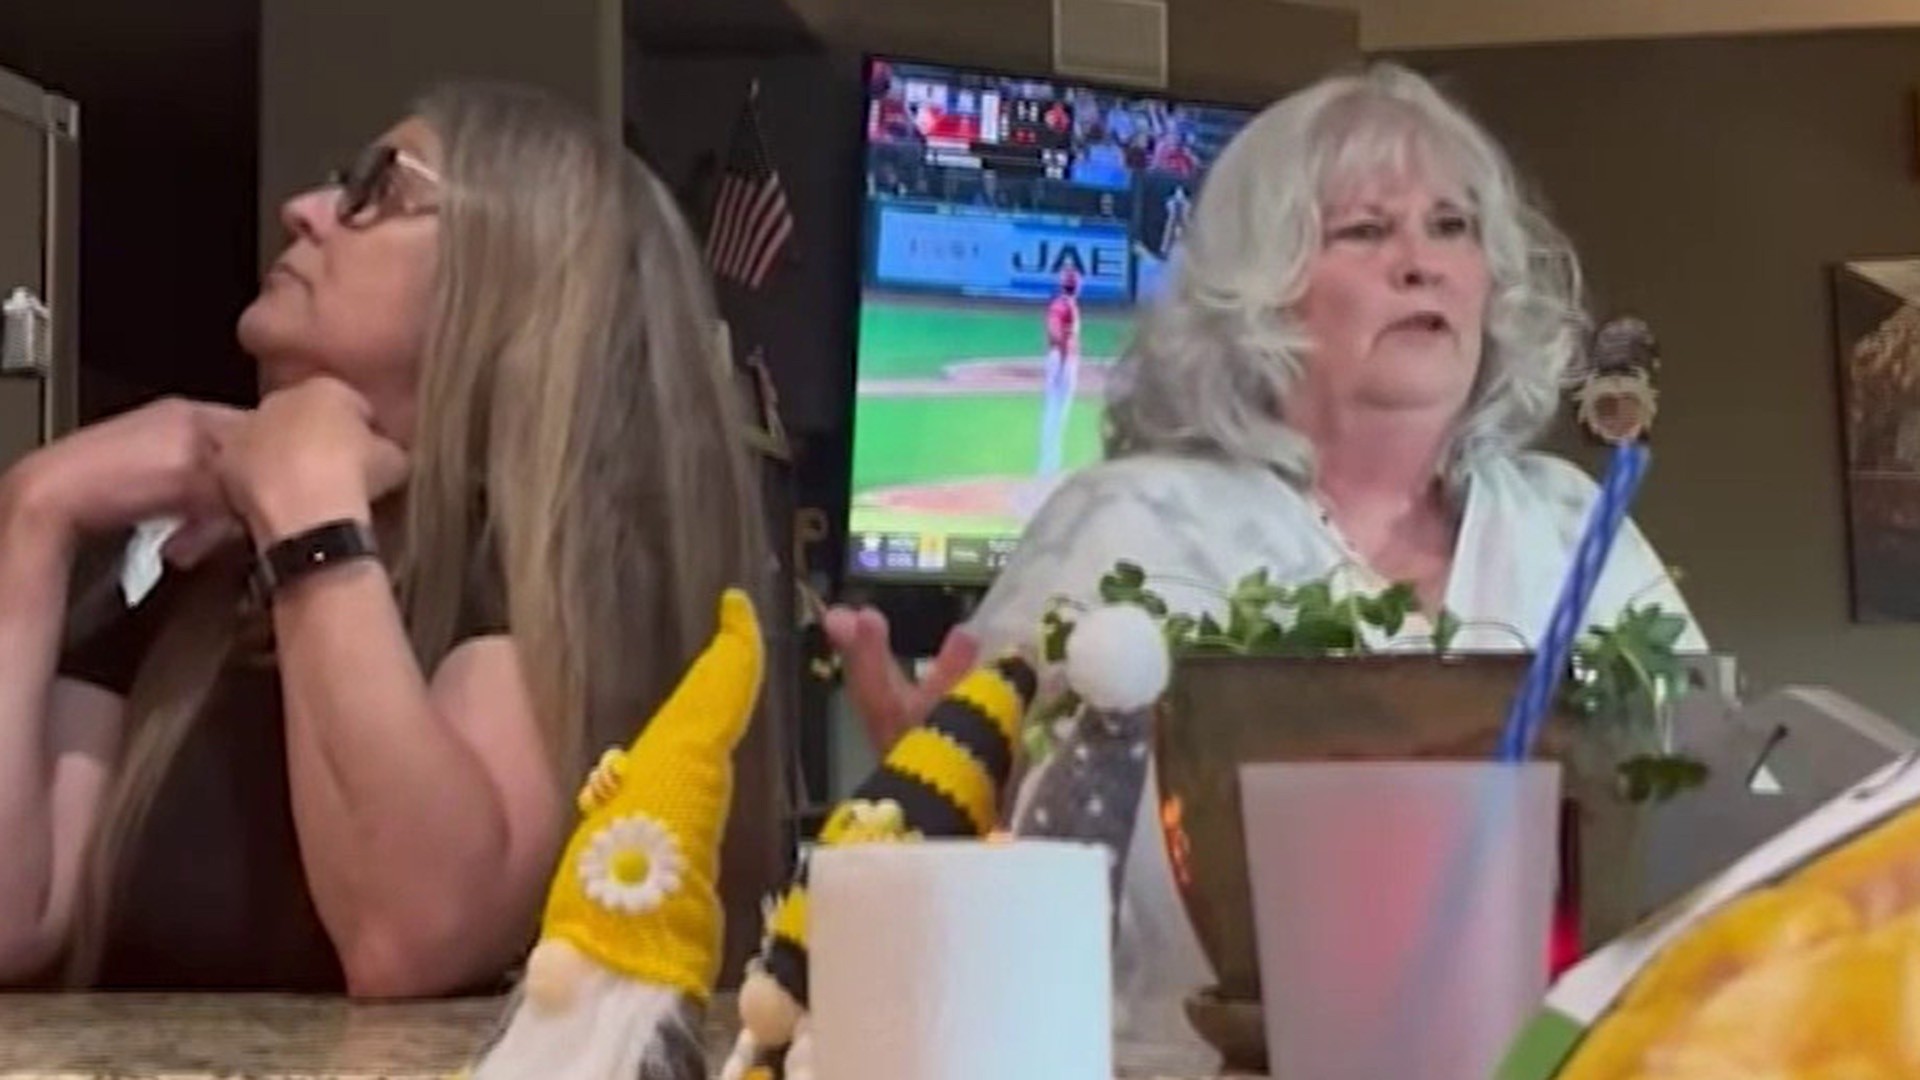 Woman is oblivious sitting next to sister before surprise reunion